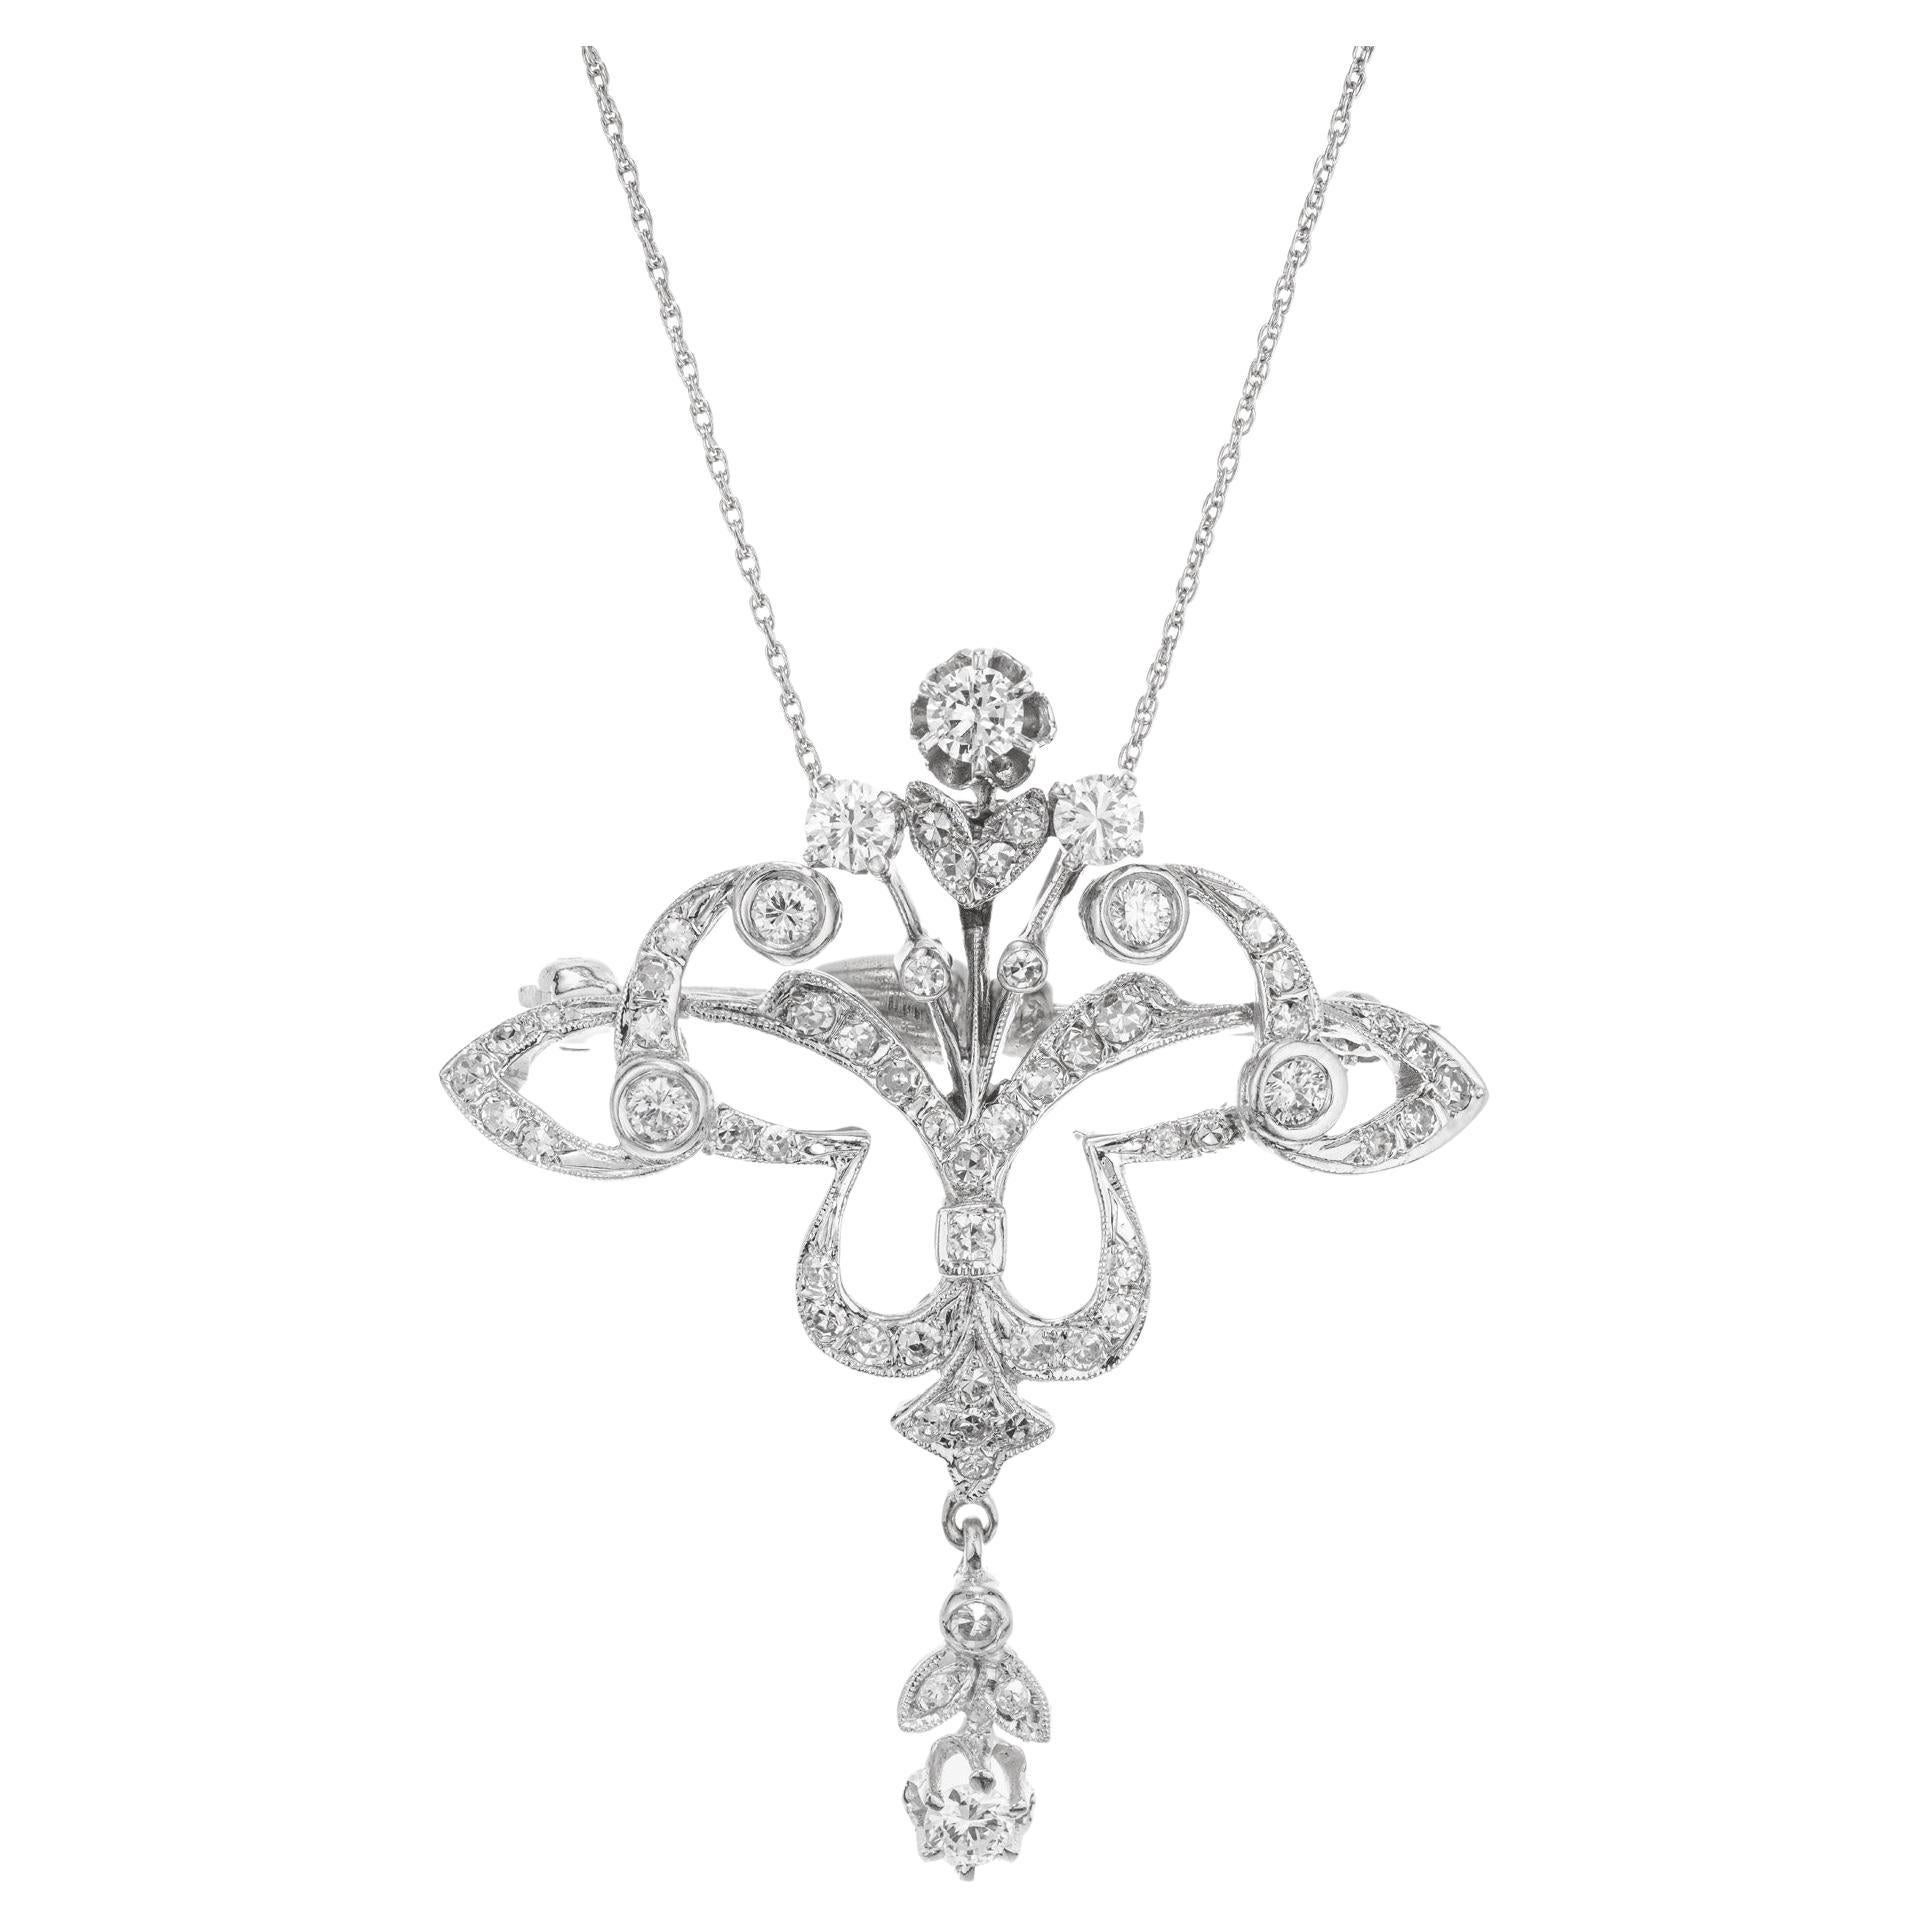 1.46 Carat Diamond White Gold Brooch Pendant Necklace For Sale